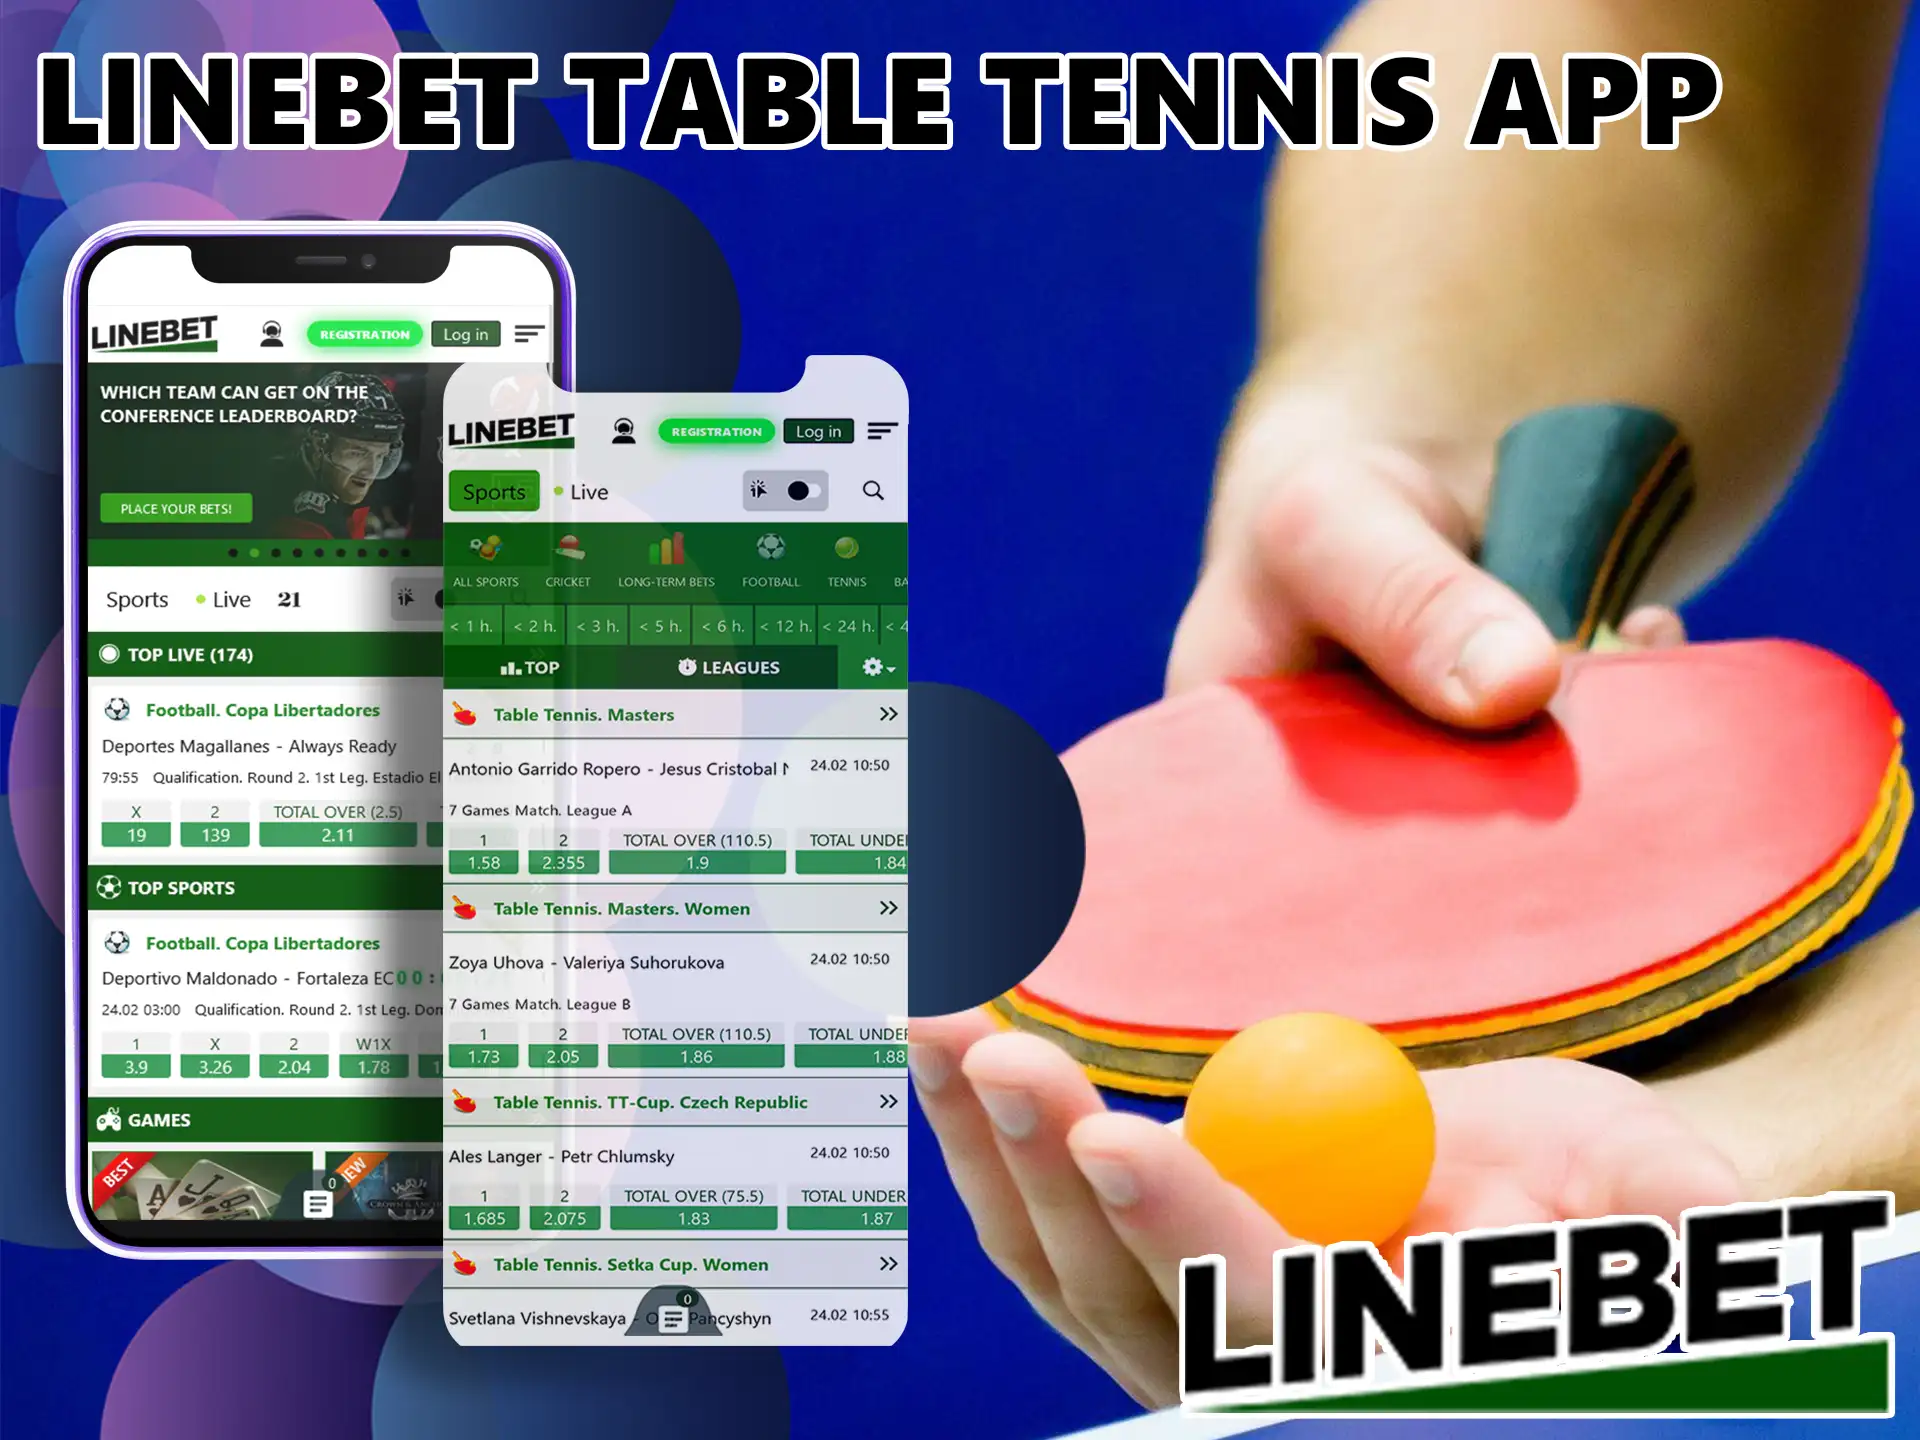 Indian users can enjoy betting on this exciting sport thanks to the well-designed software and also get real money from Linebet.